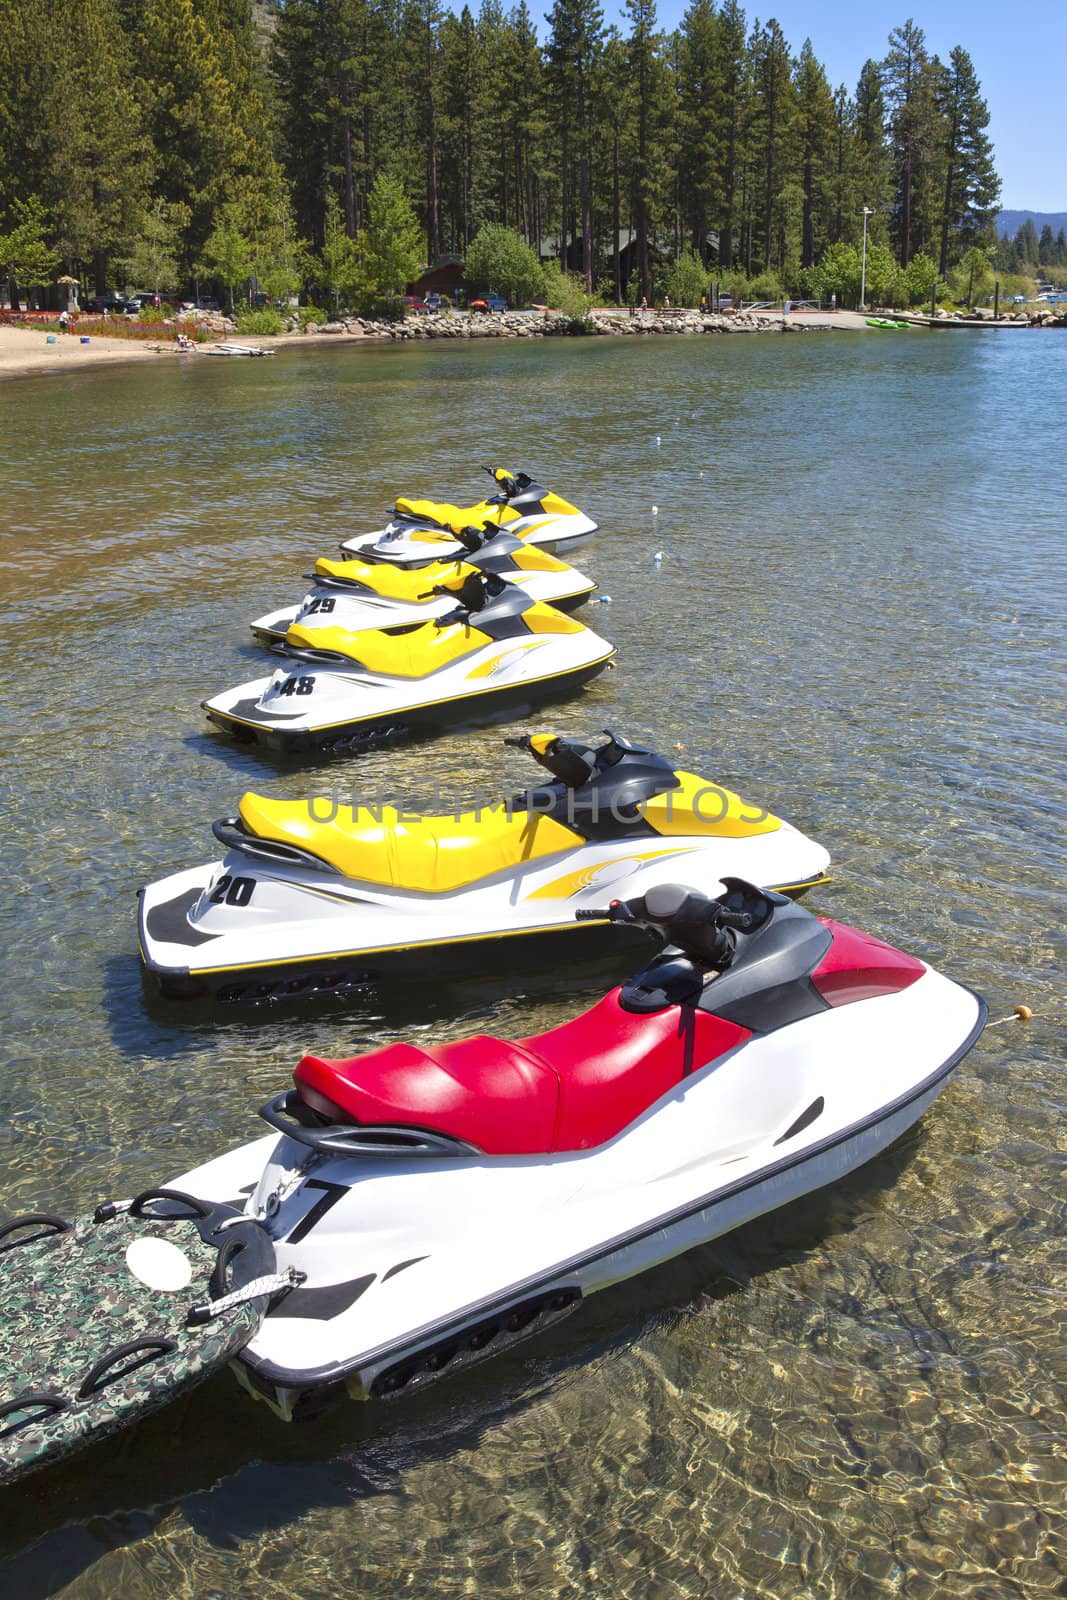 Water scooters at a ready for customers in Lake Tahoe, CA.